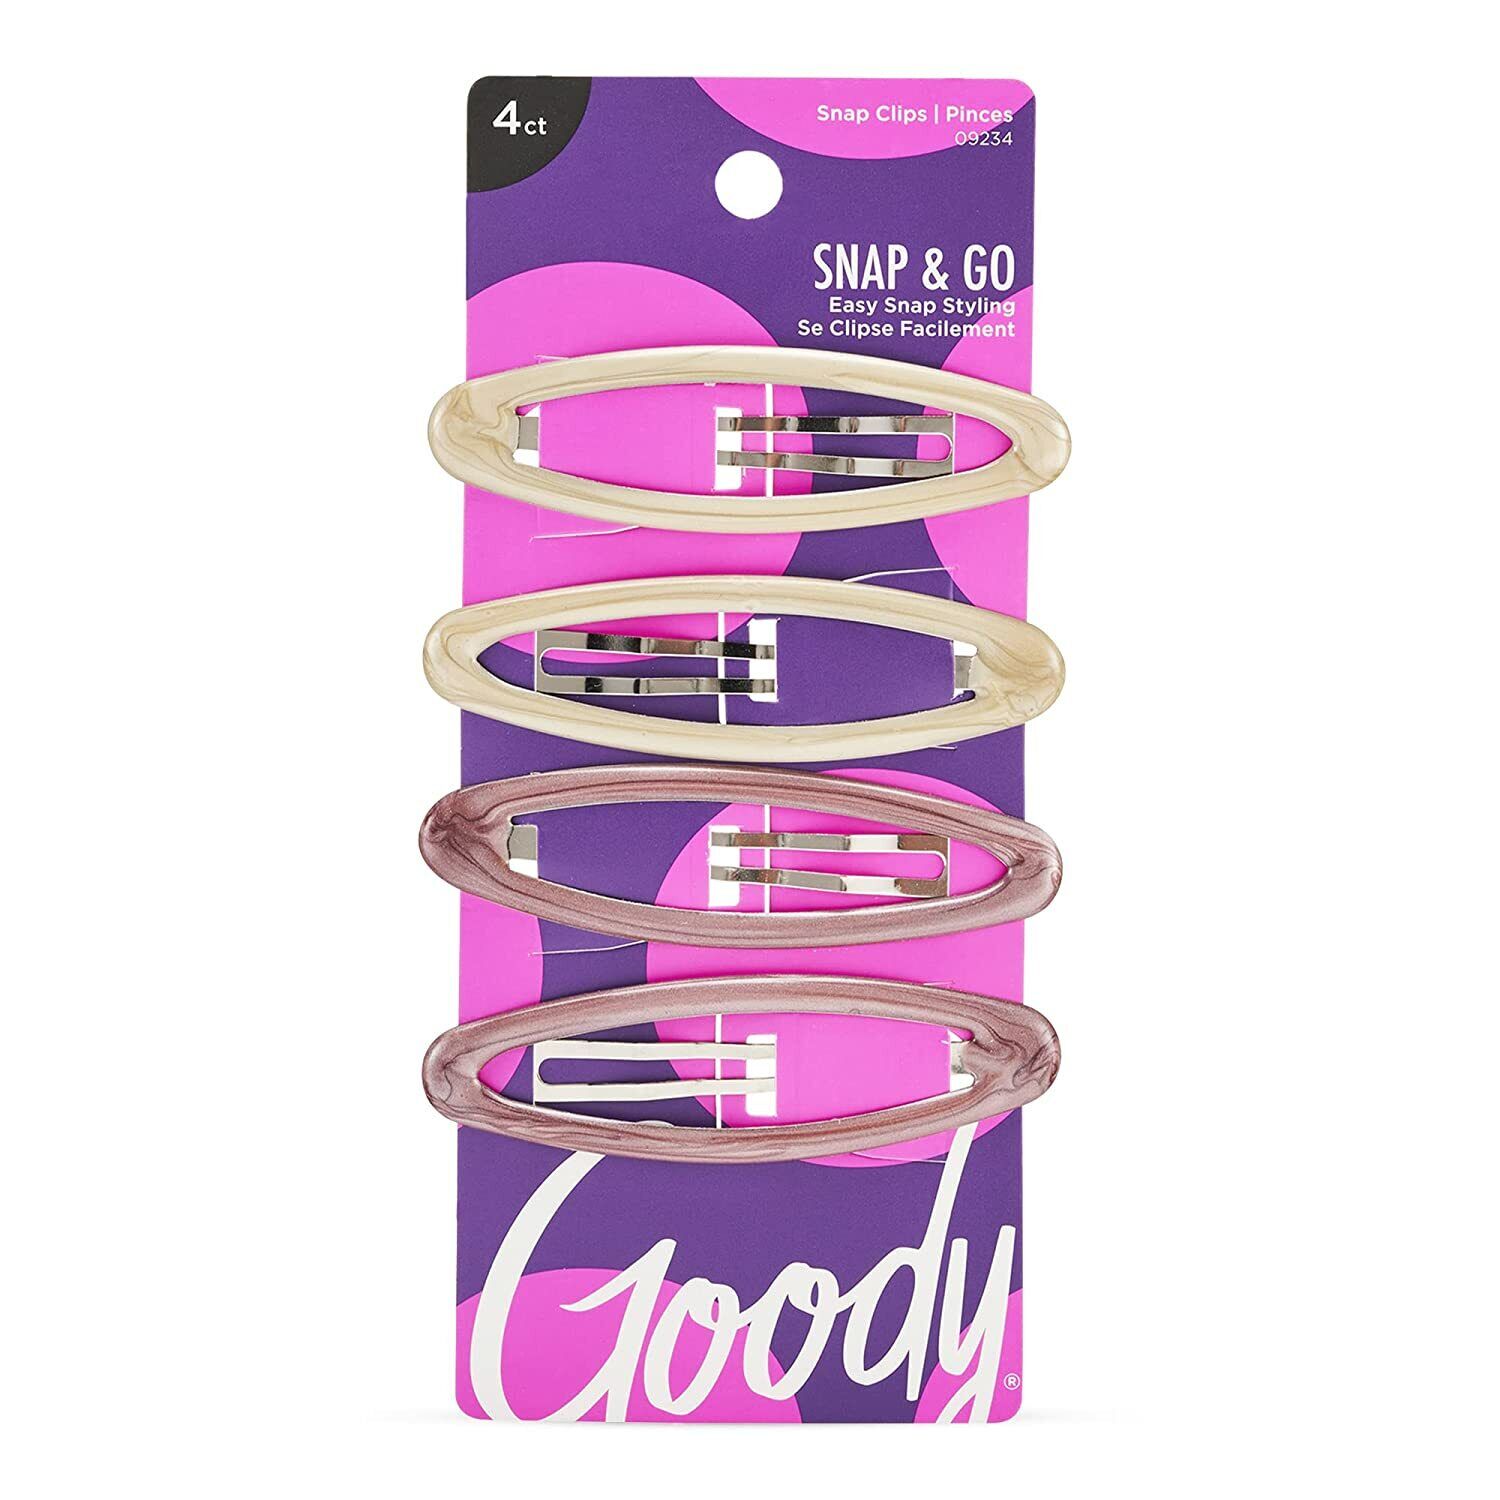 Goody Contour Clip Big Oval UPC:041457092347 Pack:72/1 NO INNER